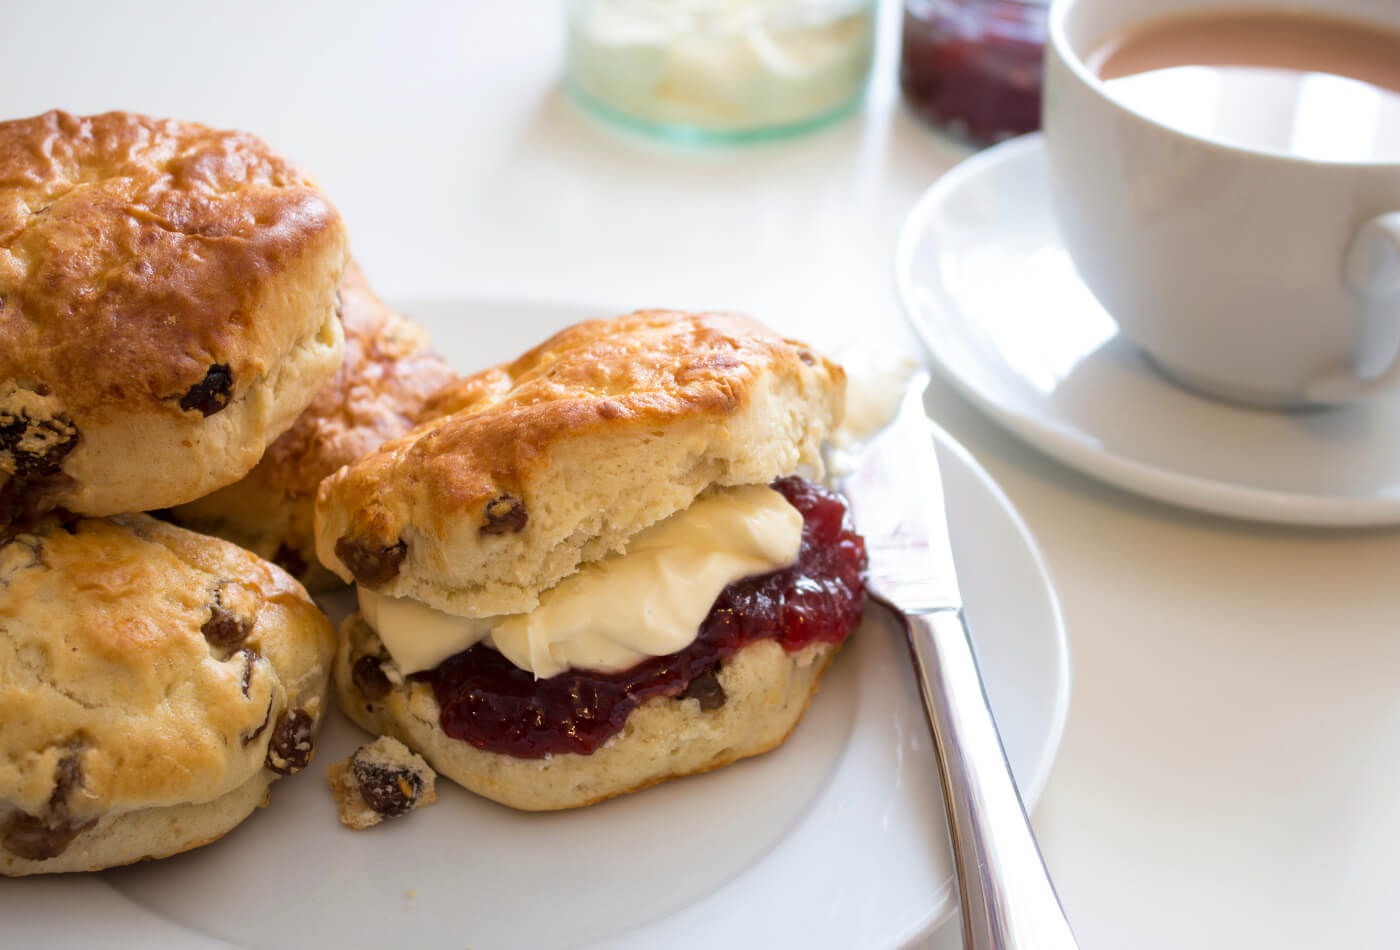 Scones with jam and cream on a plate